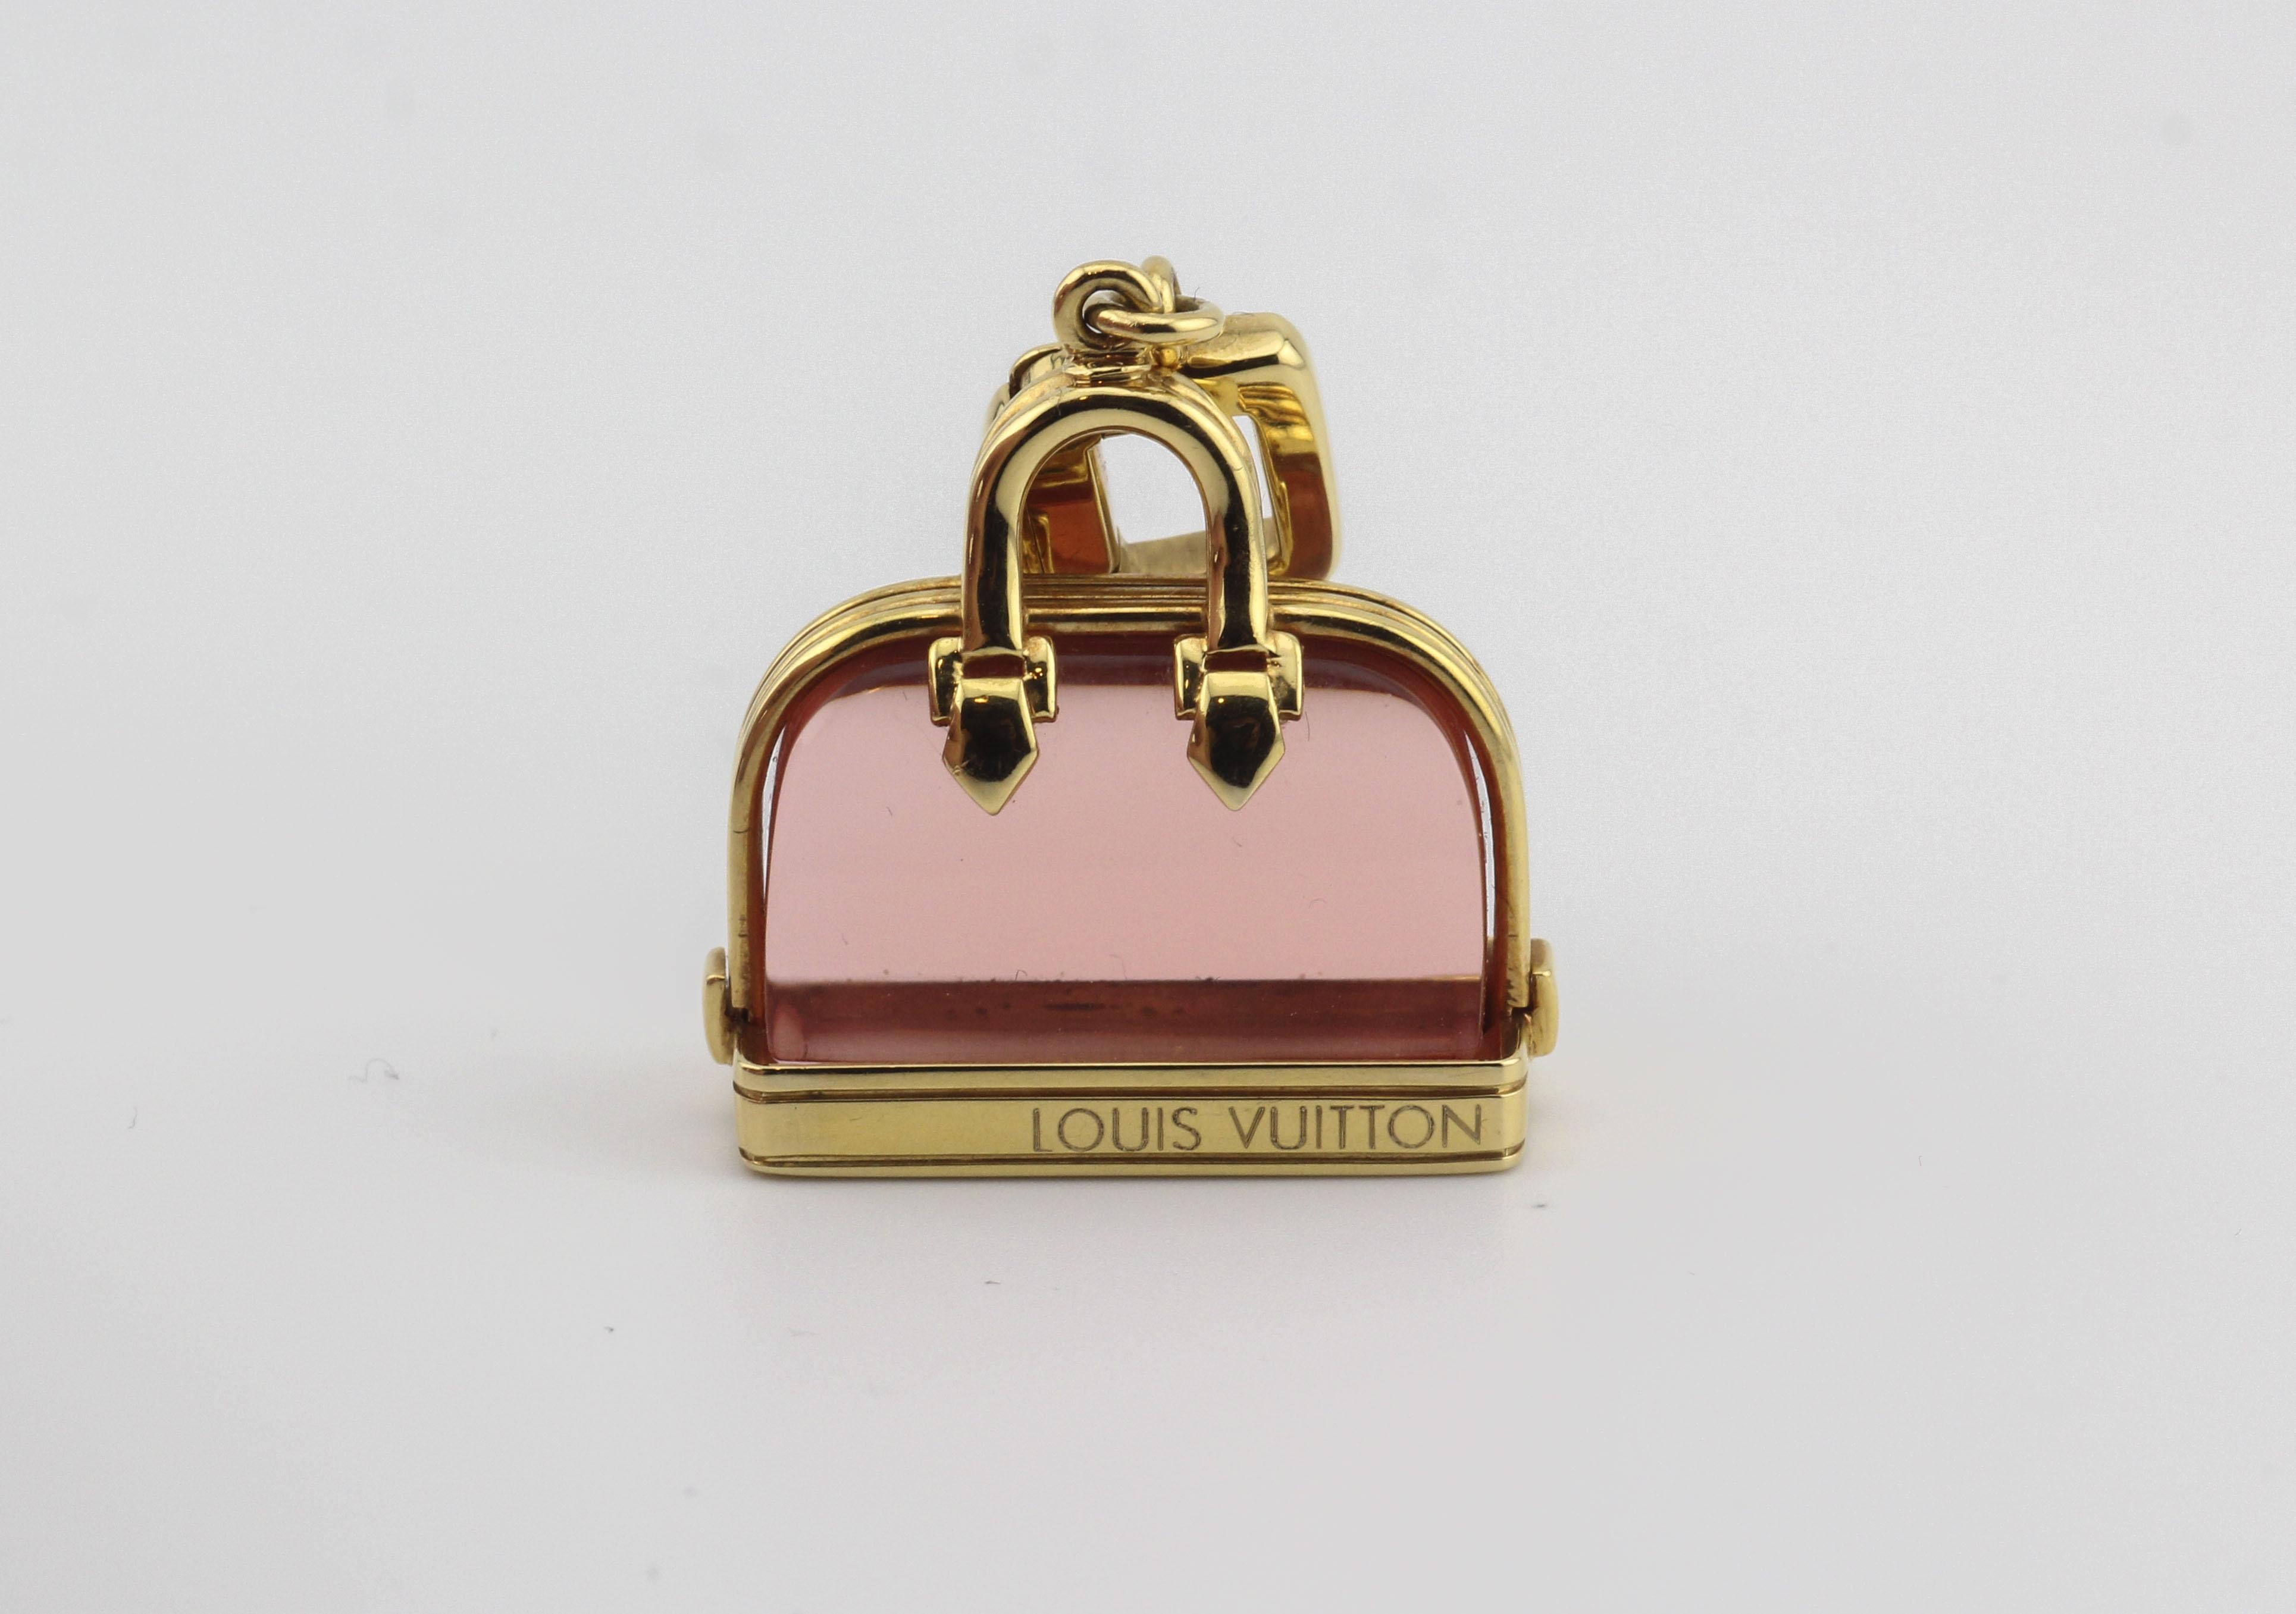 Introducing the Louis Vuitton Pink Tourmaline 18K Yellow Gold Alma Bag Charm Pendant, a luxurious and sophisticated jewelry piece that combines the iconic Louis Vuitton style with exquisite gemstones and craftsmanship. This charm pendant is a